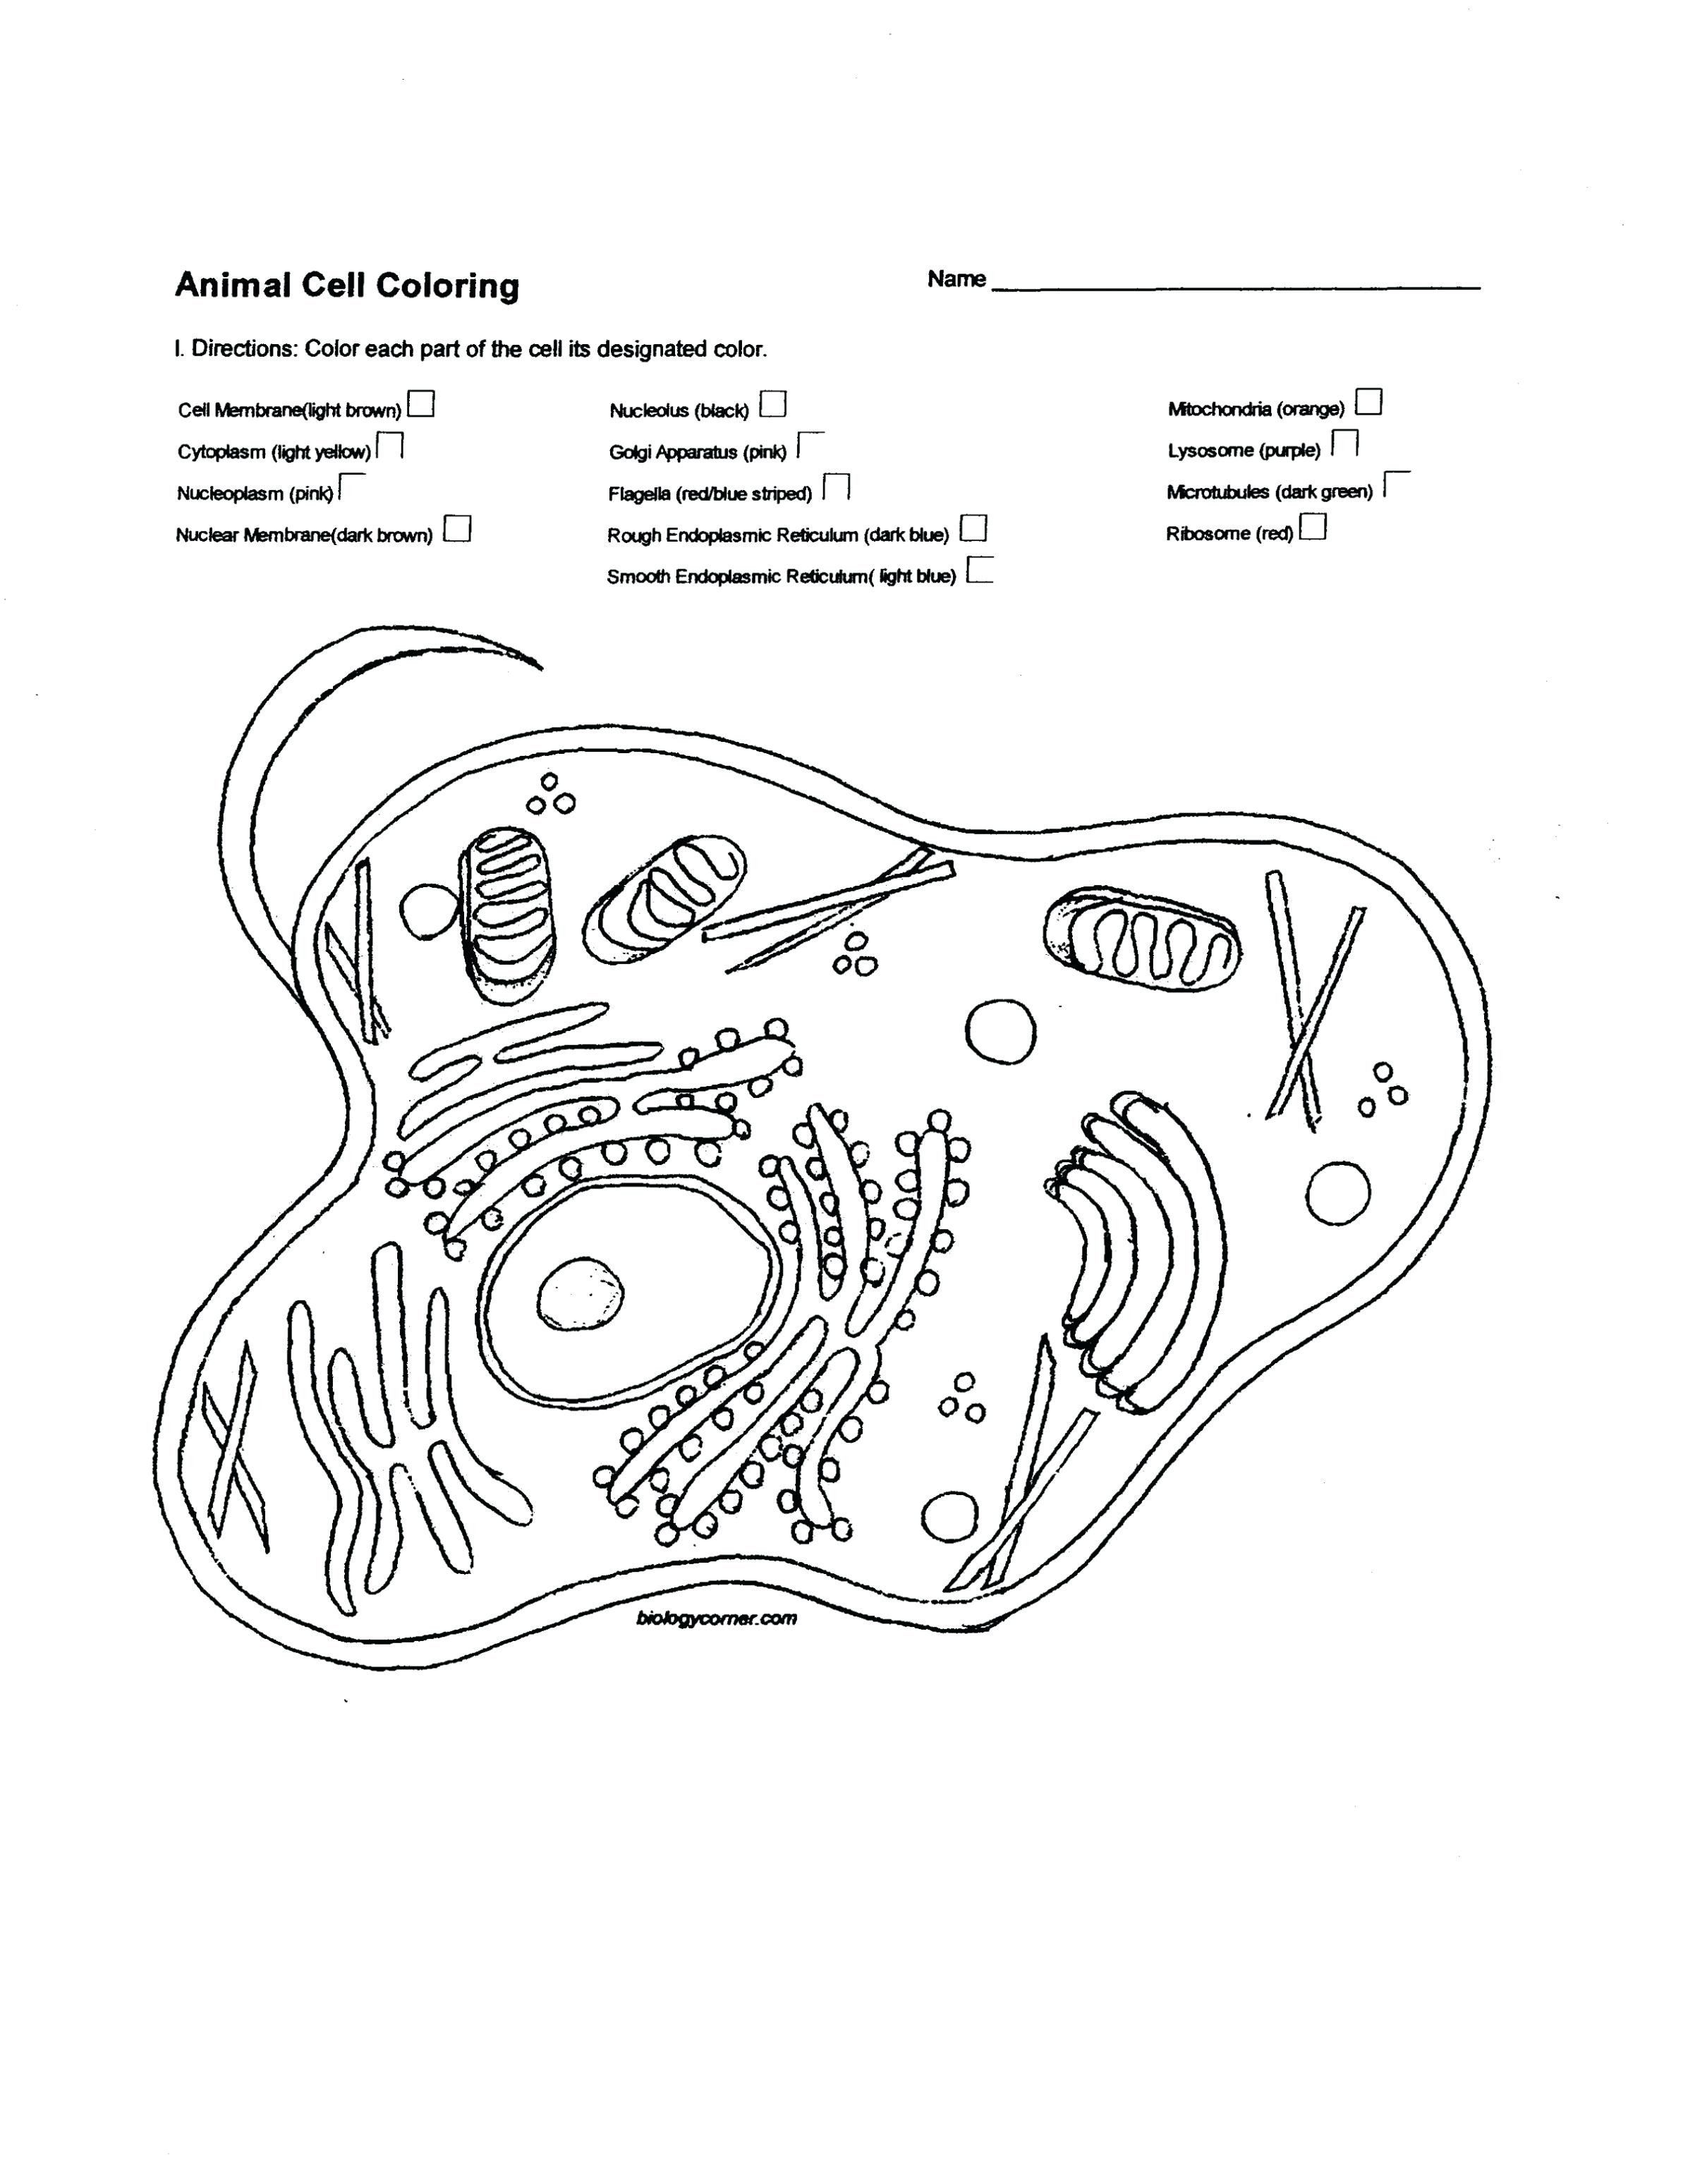 Animal And Plant Cell Coloring Pages - Coloring Home Throughout Animal Cells Coloring Worksheet